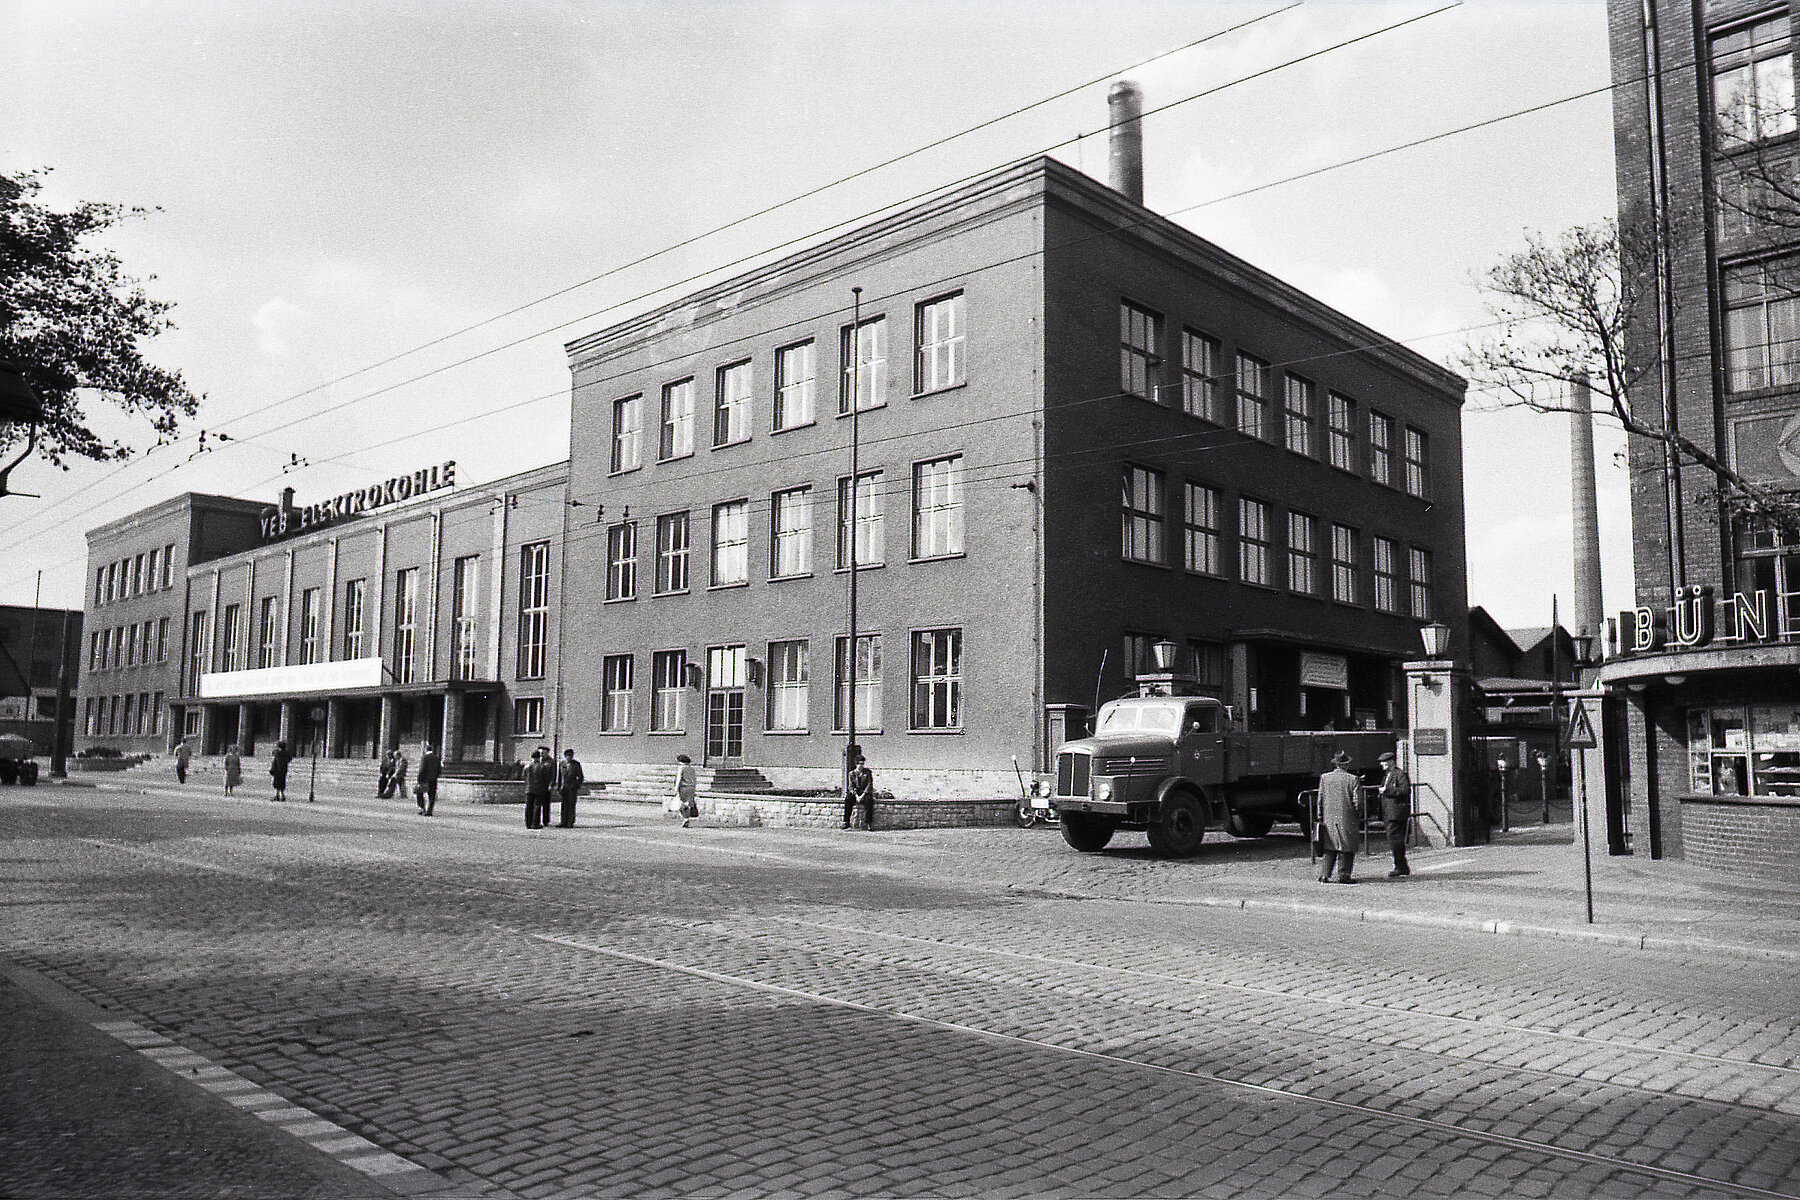 Cobbled street with a large brick industrial building in the background. People are walking in front of it. To the right of the building, a car pulls out of a driveway. 